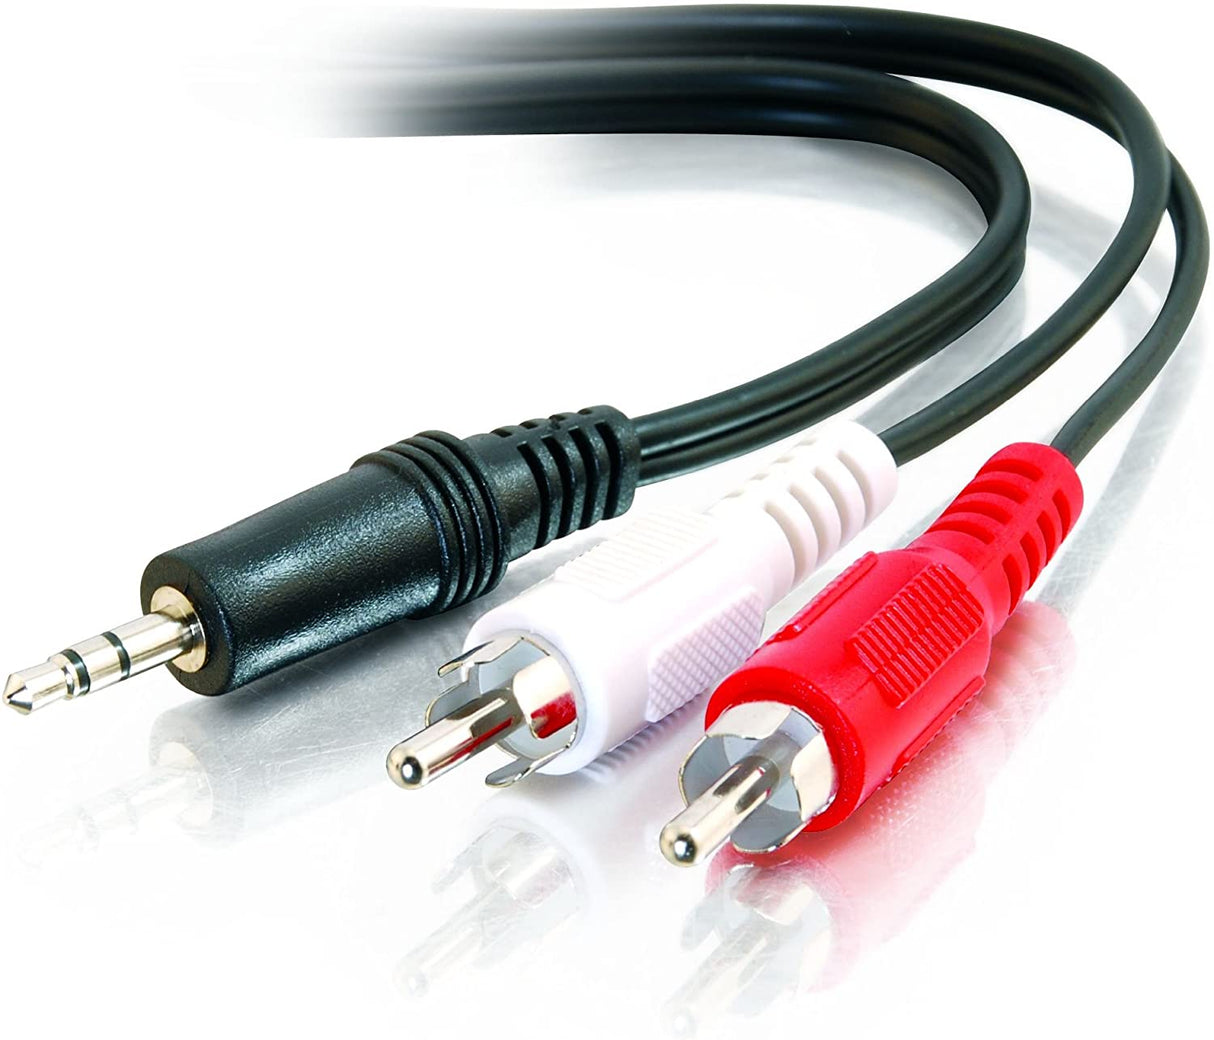 C2g/ cables to go C2G 40421 Value Series One 3.5mm Stereo Male to Two RCA Stereo Male Y-Cable (6 Inches) Black Male Stereo to RCA Male 6-Inch Black